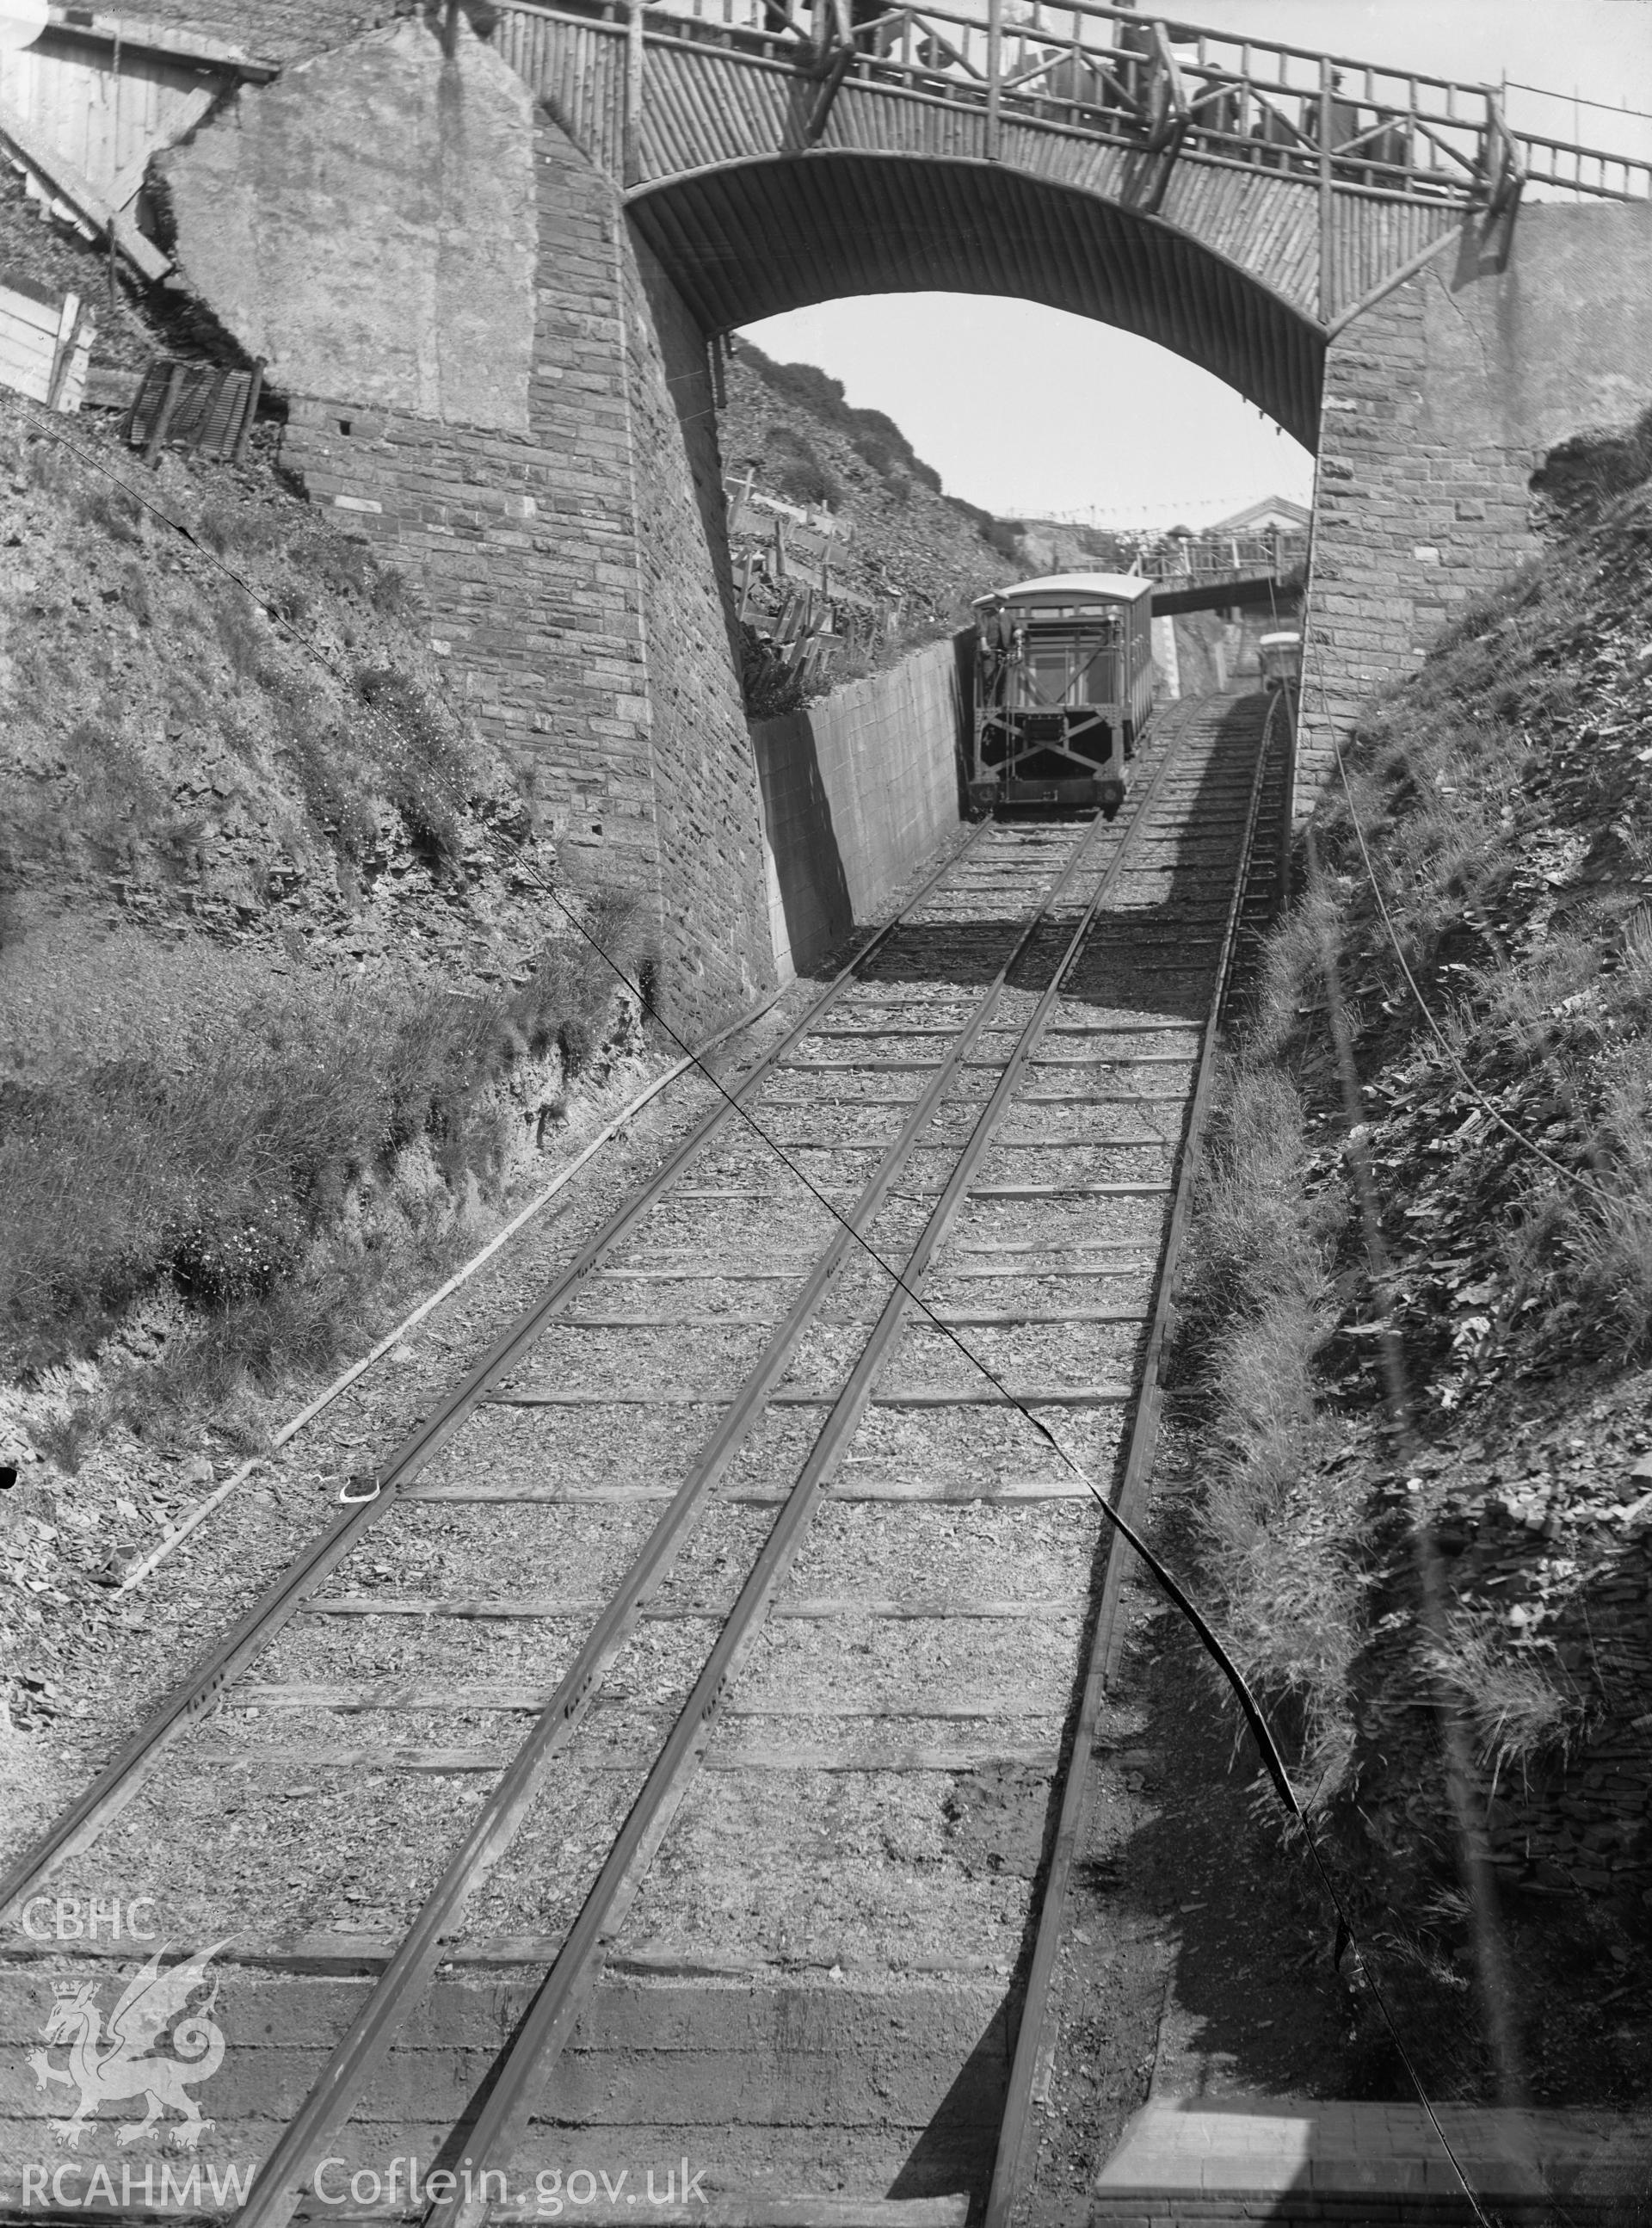 Black and white image dating from c.1910 showing a close-up view of the train on the Cliff Railway, Aberystwyth. (broken negative).